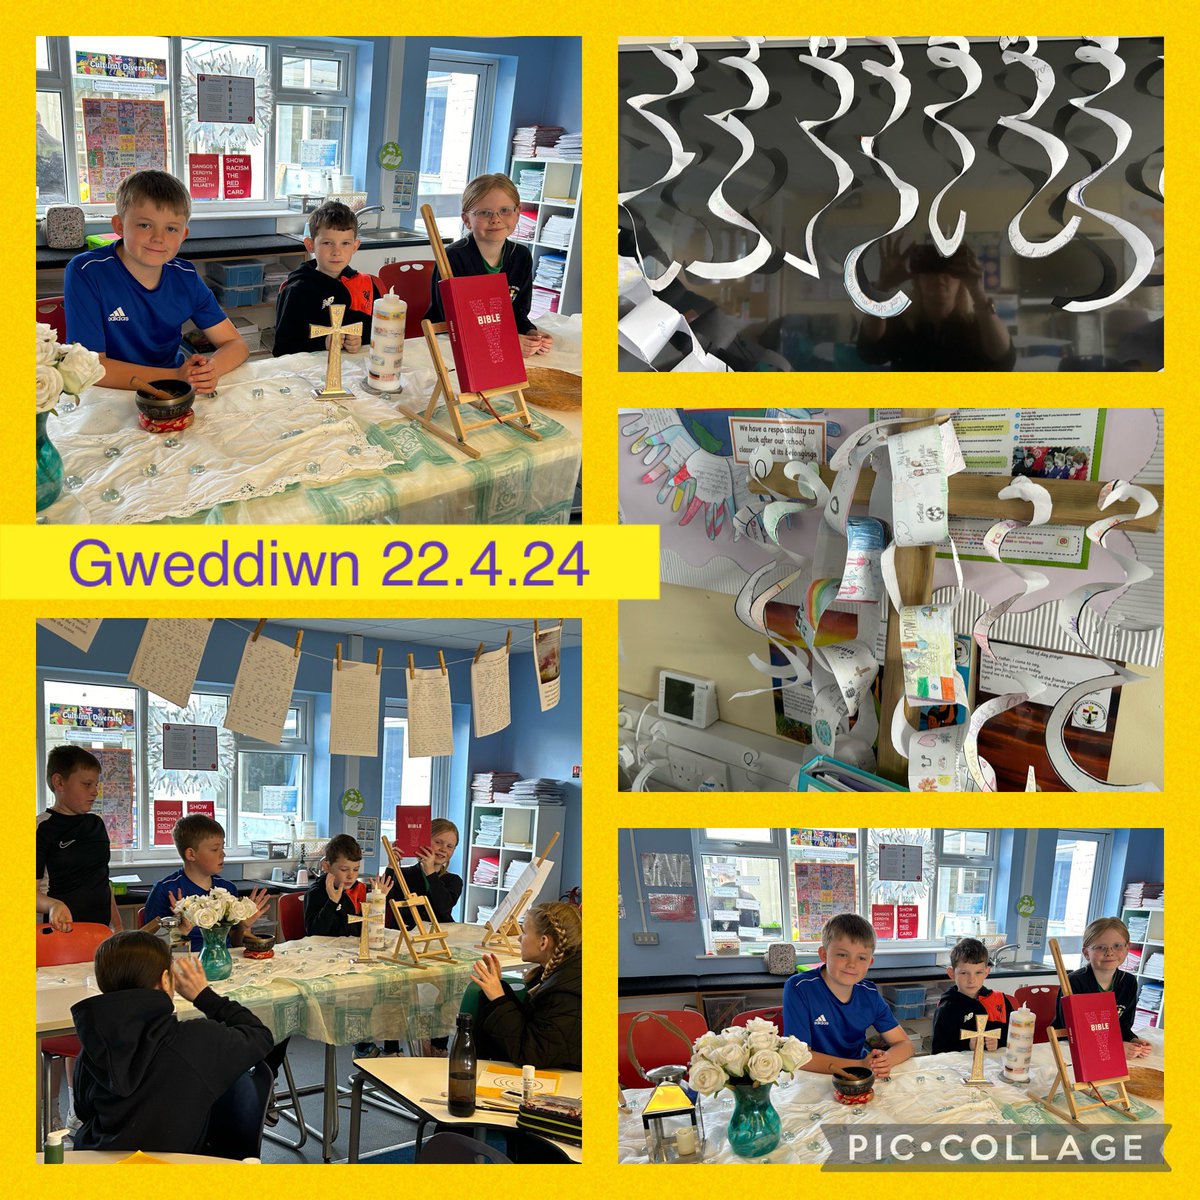 #STJYear5 had a busy Monday planting lettuce🥬and sweet corn 🌽in our new polytunnel. We also created spiral ascension prayers in our class Gweddiwn 🙏